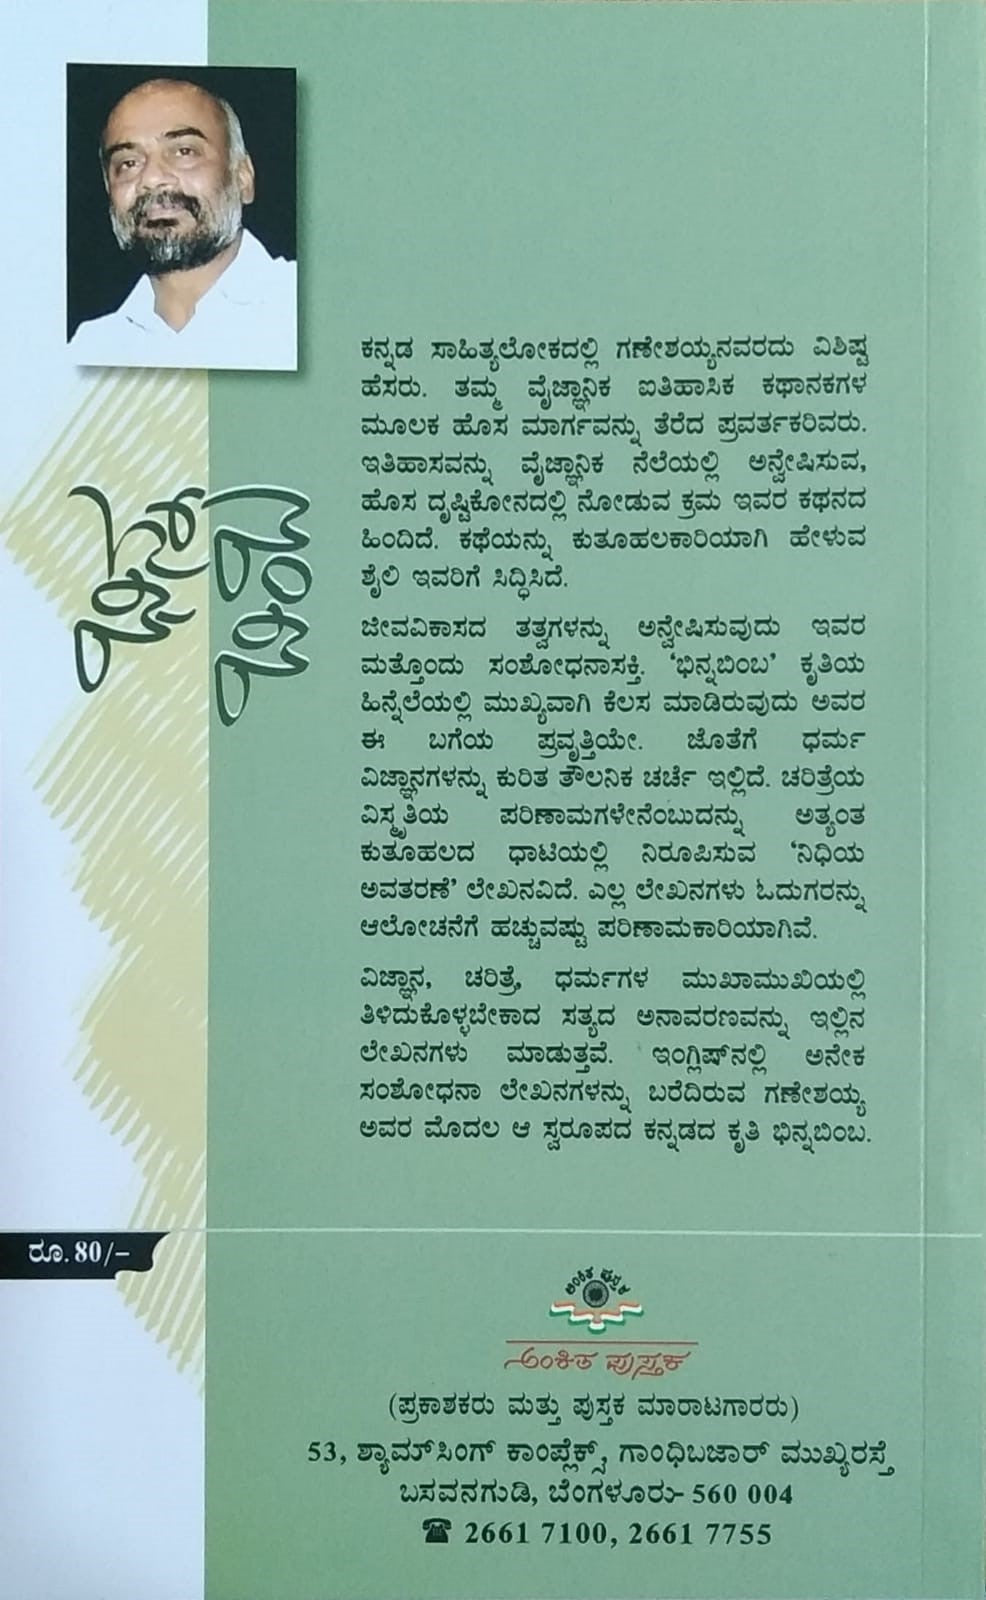 'Bhinna Bimba' is a Collection of Artilcles Which is Written by Dr. K. N. Ganeshayya and Published by Ankita Pustaka